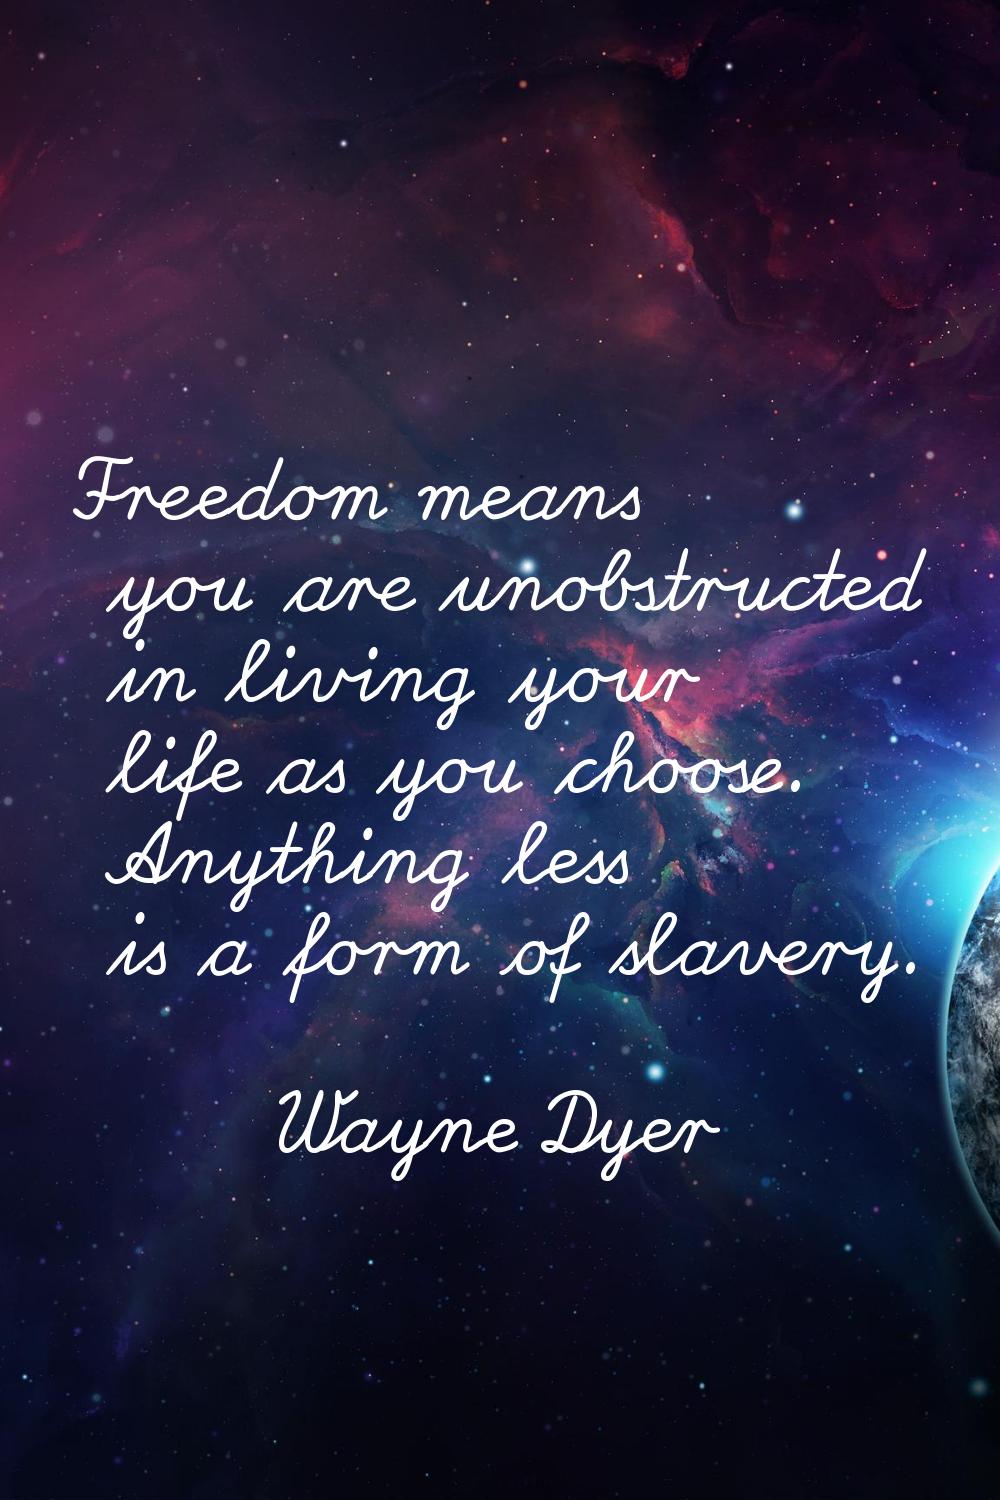 Freedom means you are unobstructed in living your life as you choose. Anything less is a form of sl